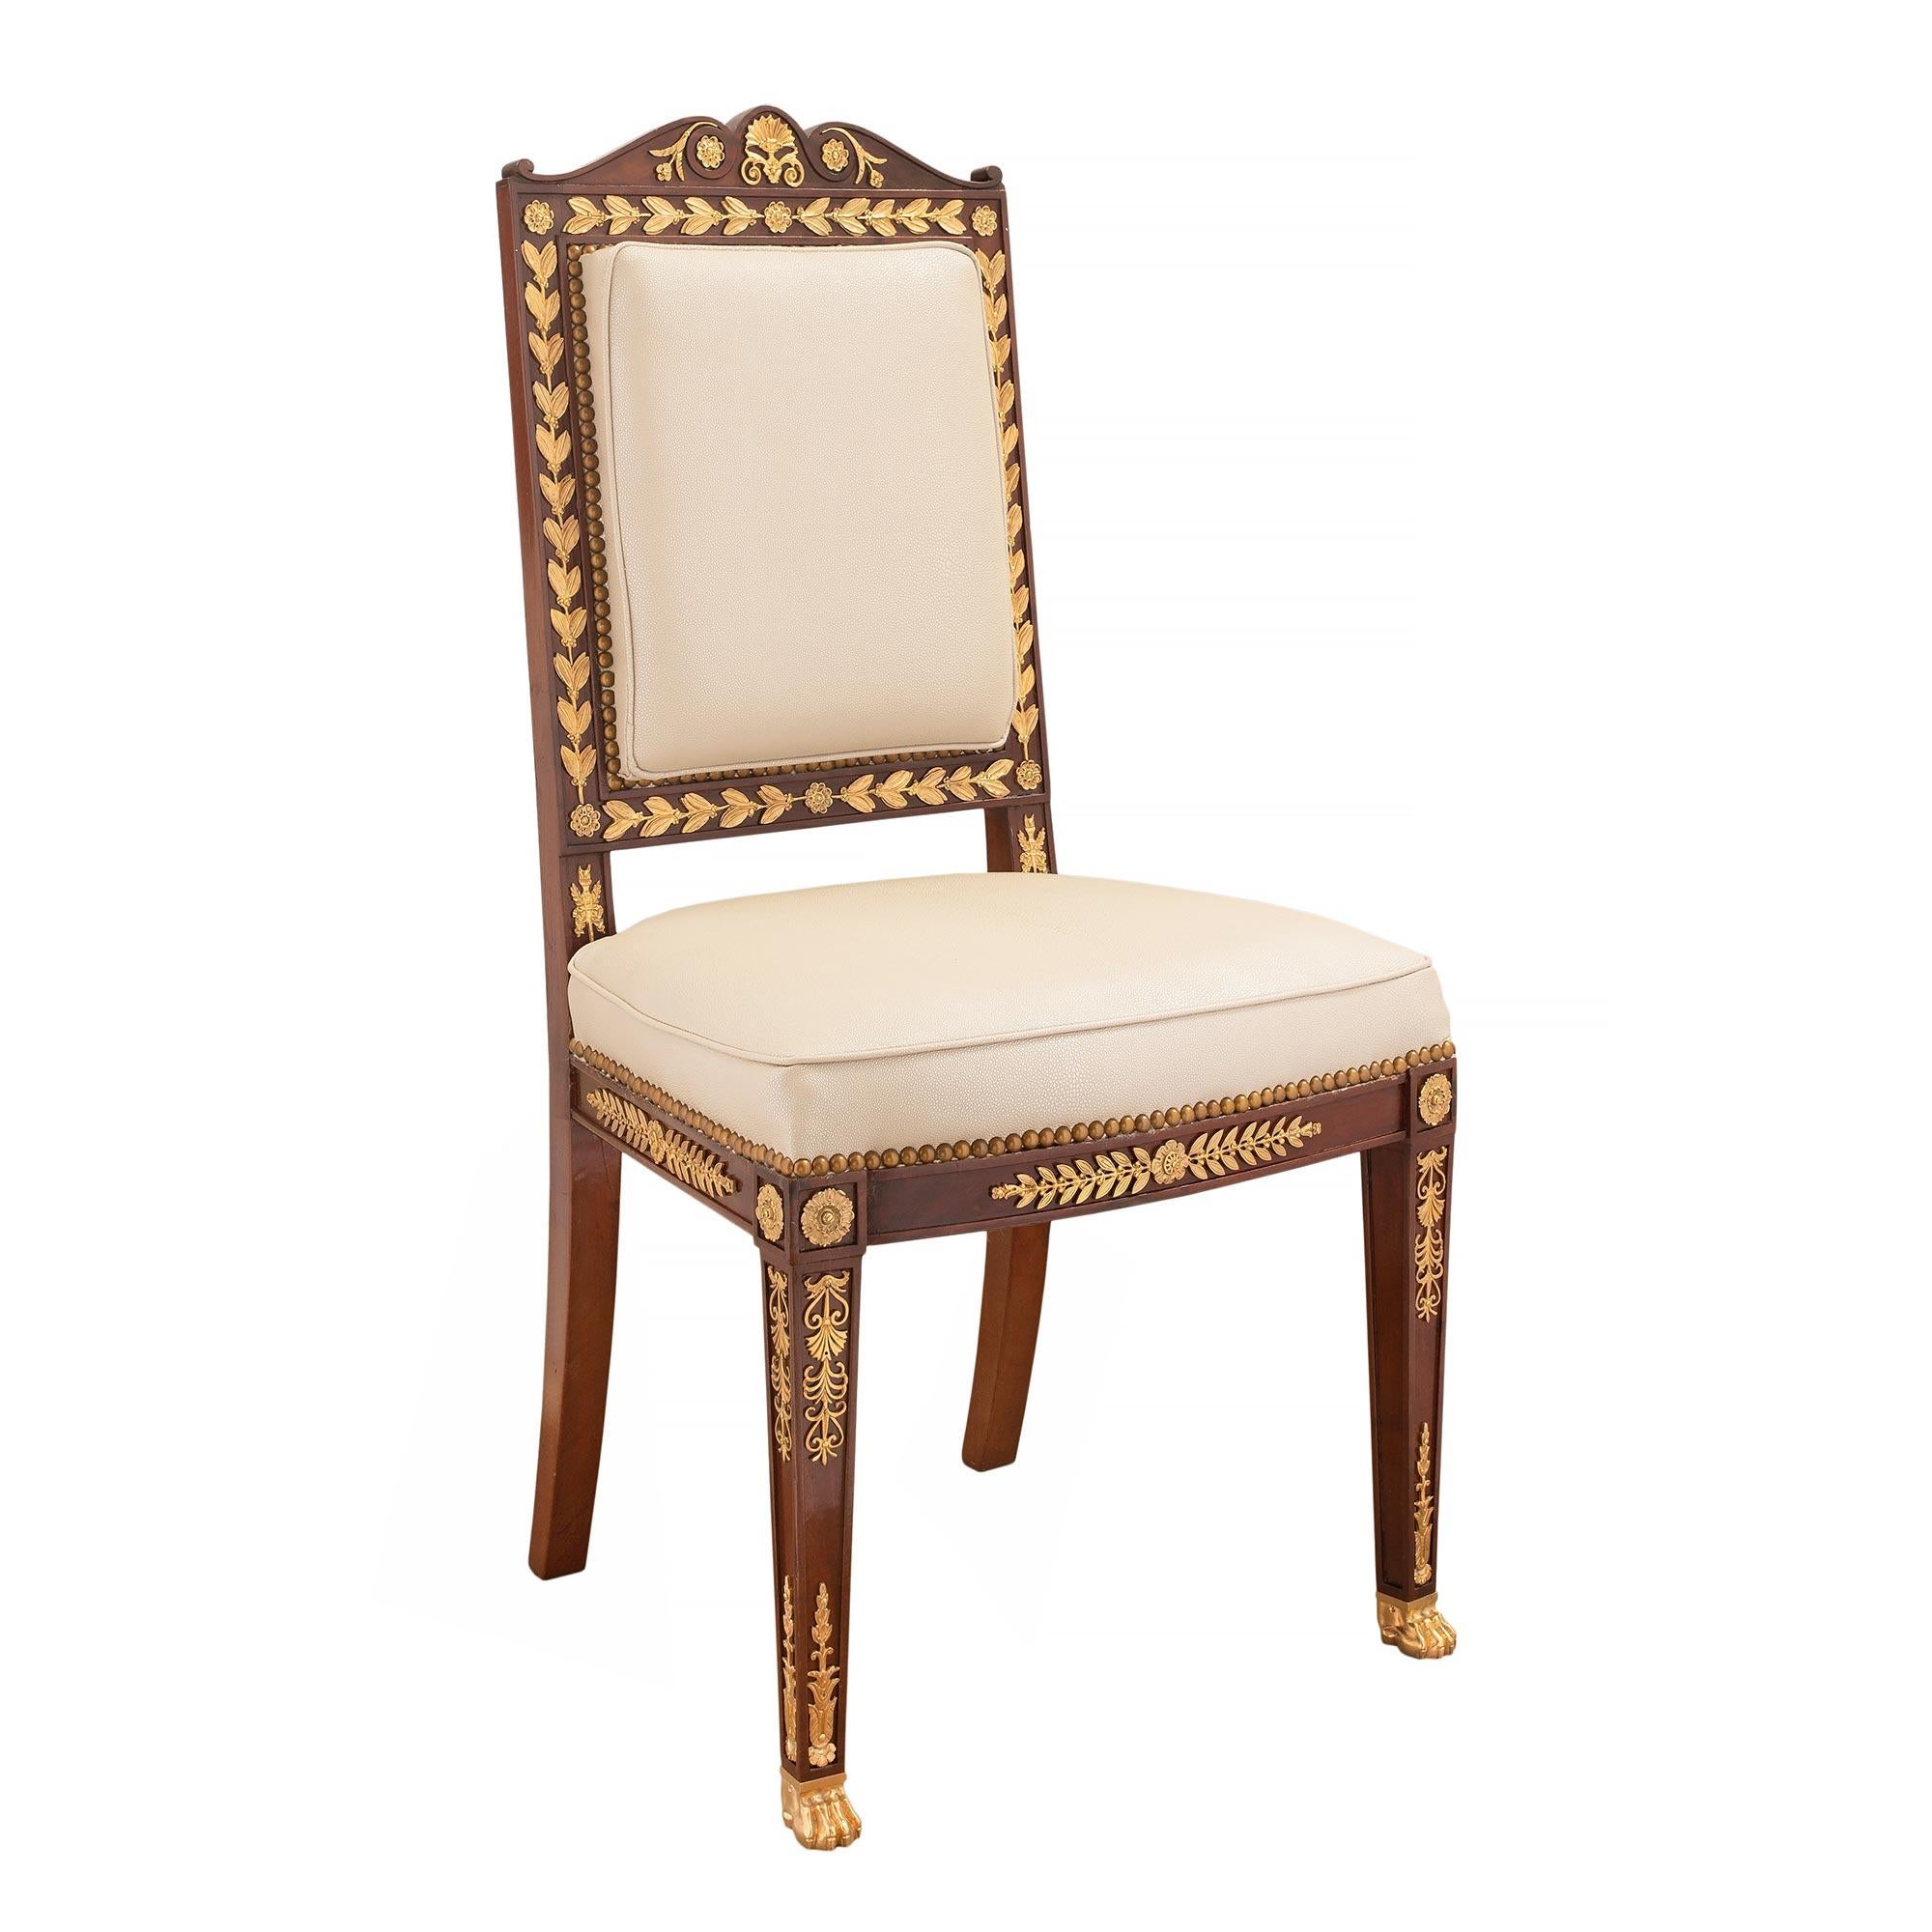 A striking French 19th century Empire st. ormolu and solid mahogany side chair. The chair is raised by handsome ormolu paw feet and square tapered legs. Each leg is accented with decorative recessed panels with intricately chased fitted pierced